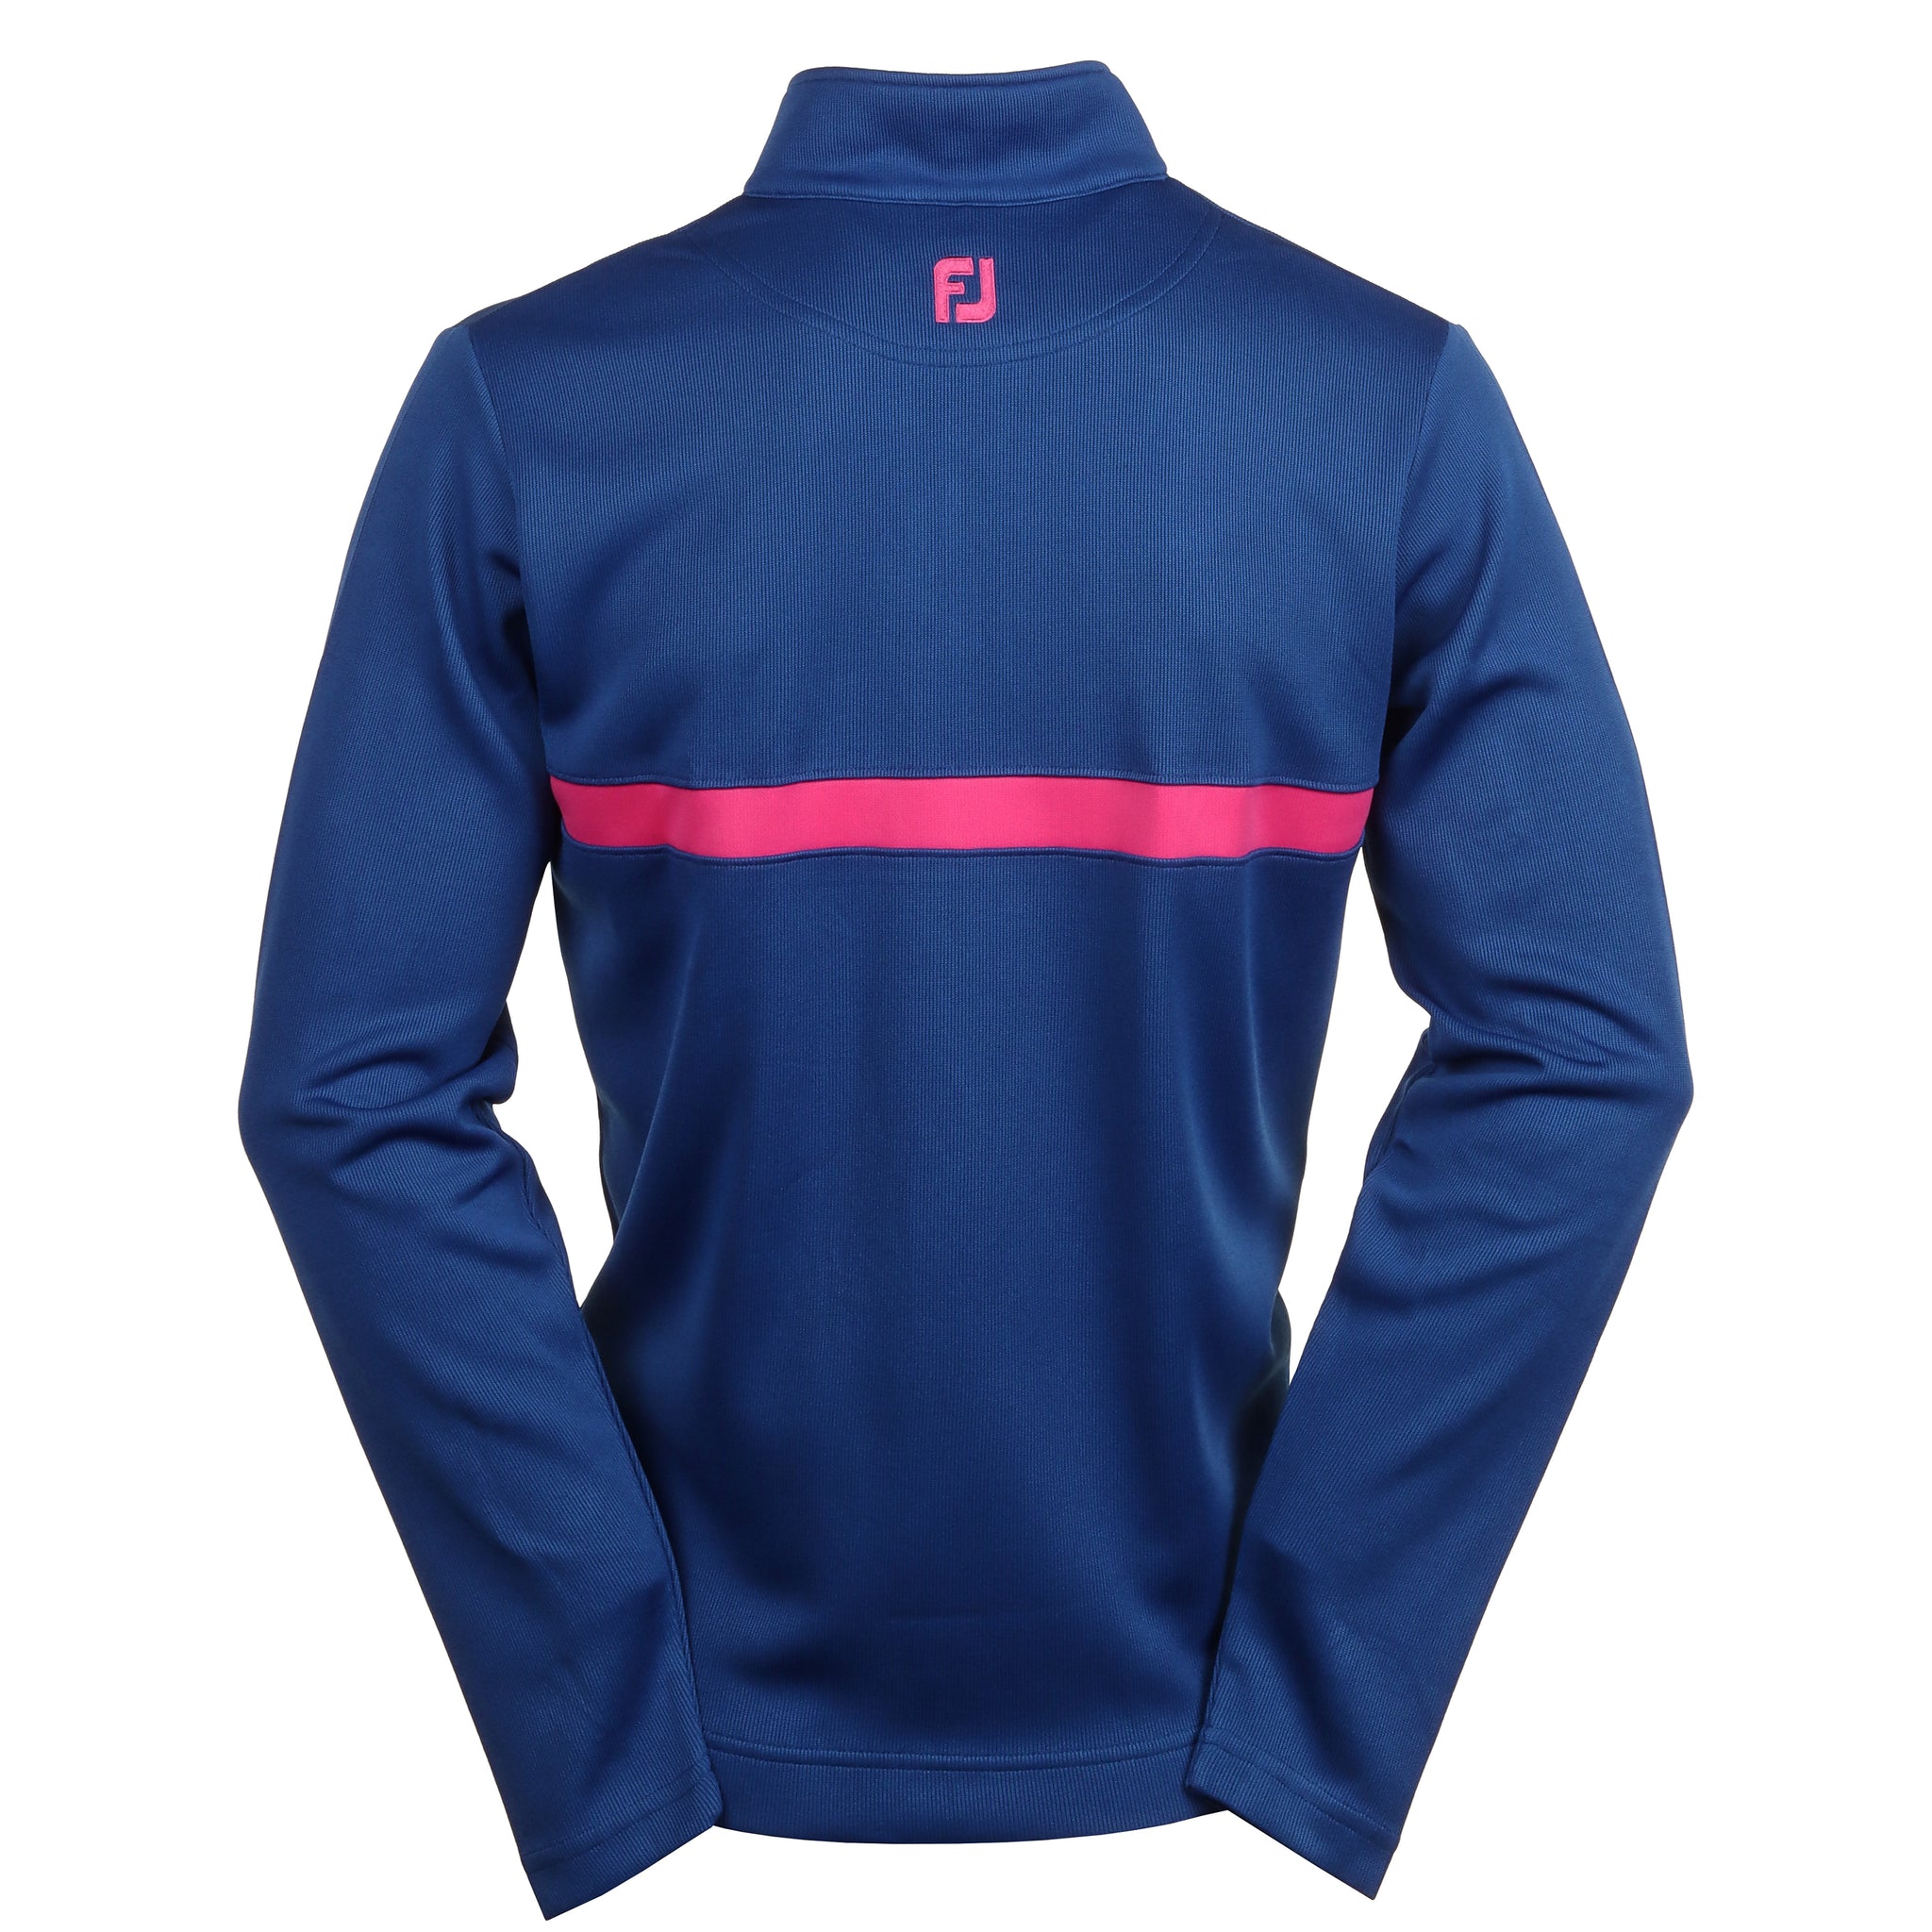 footjoy-inset-stripe-chill-out-pullover-81627-deep-blue-berry